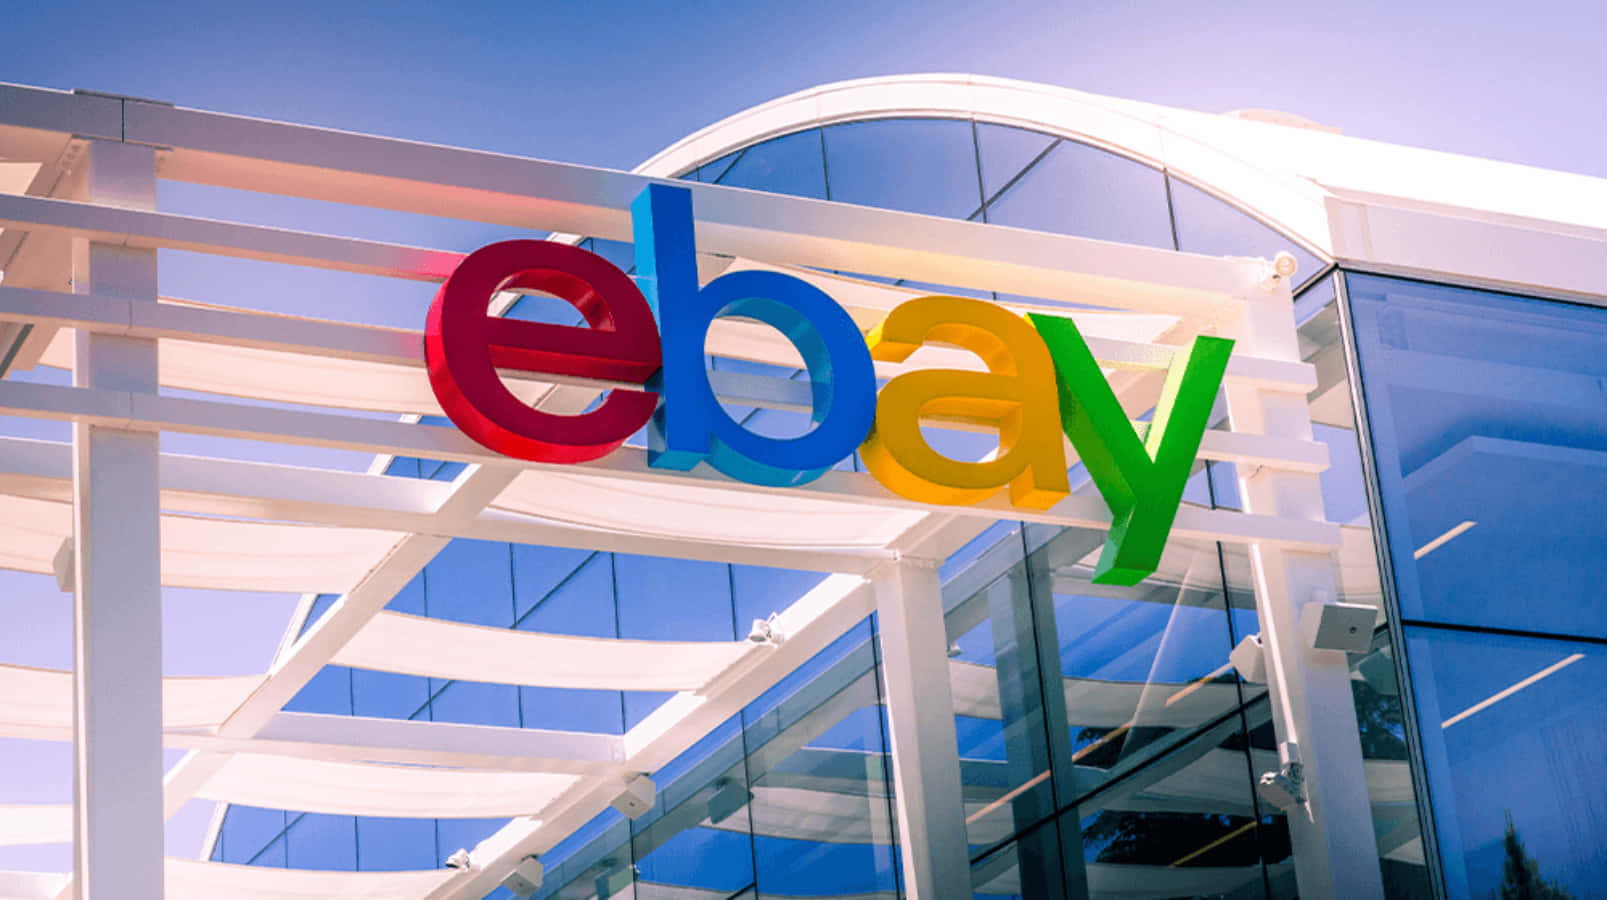 Get what you need quickly and securely on Ebay